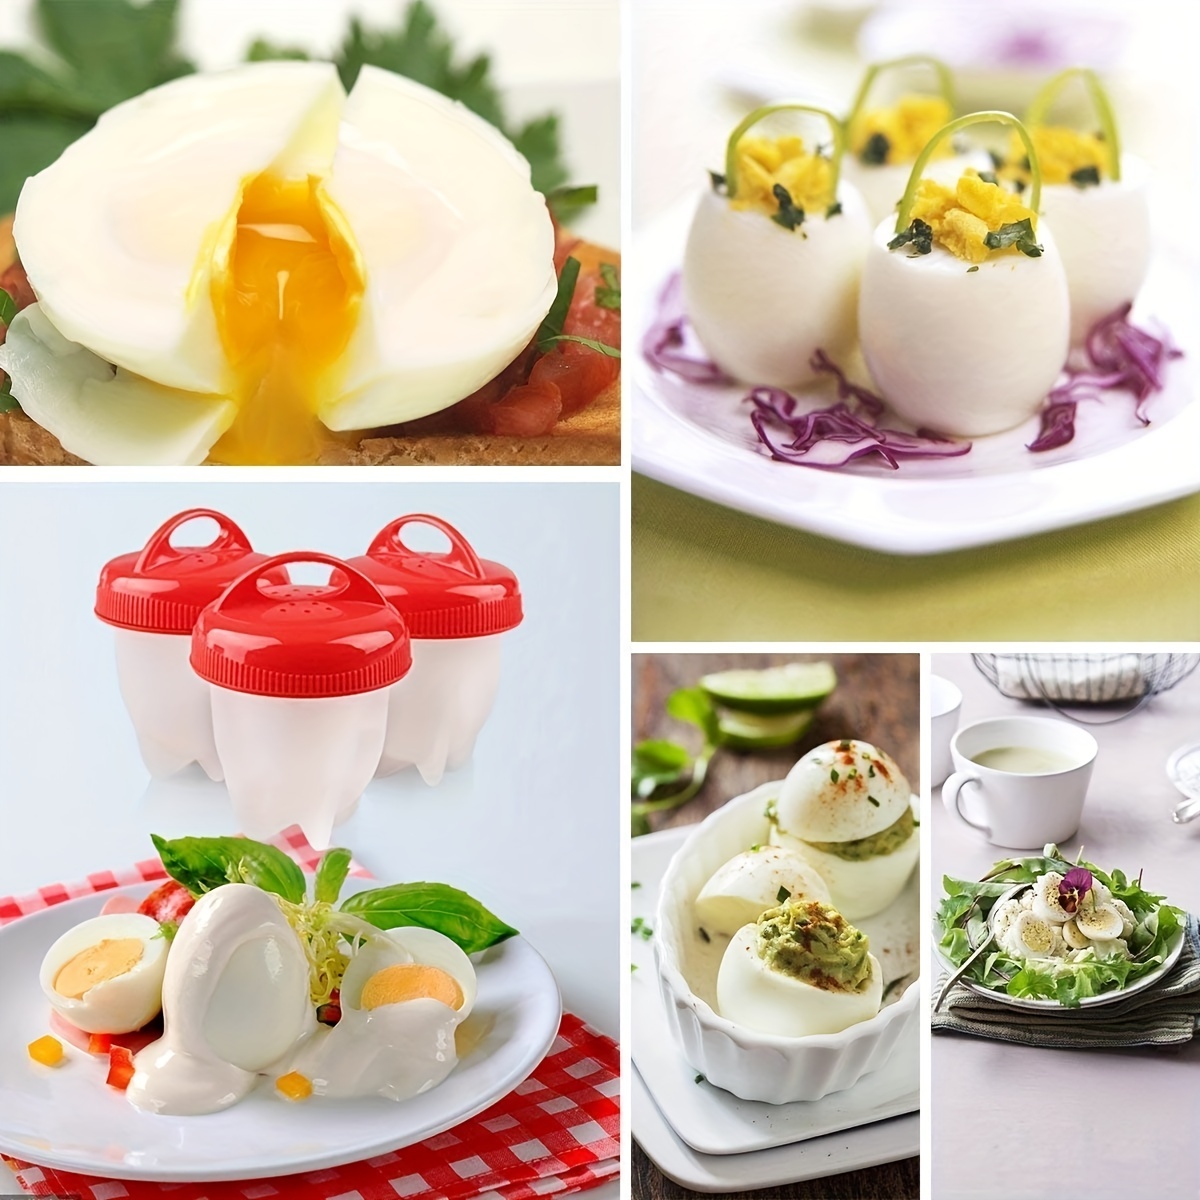 Non-stick Silicone Egg Cup Cooking Cooker Kitchen Baking Gadget Pan  Separator Steamed Egg Cup Egg Poachers Kitchen Gadgets Tools - AliExpress